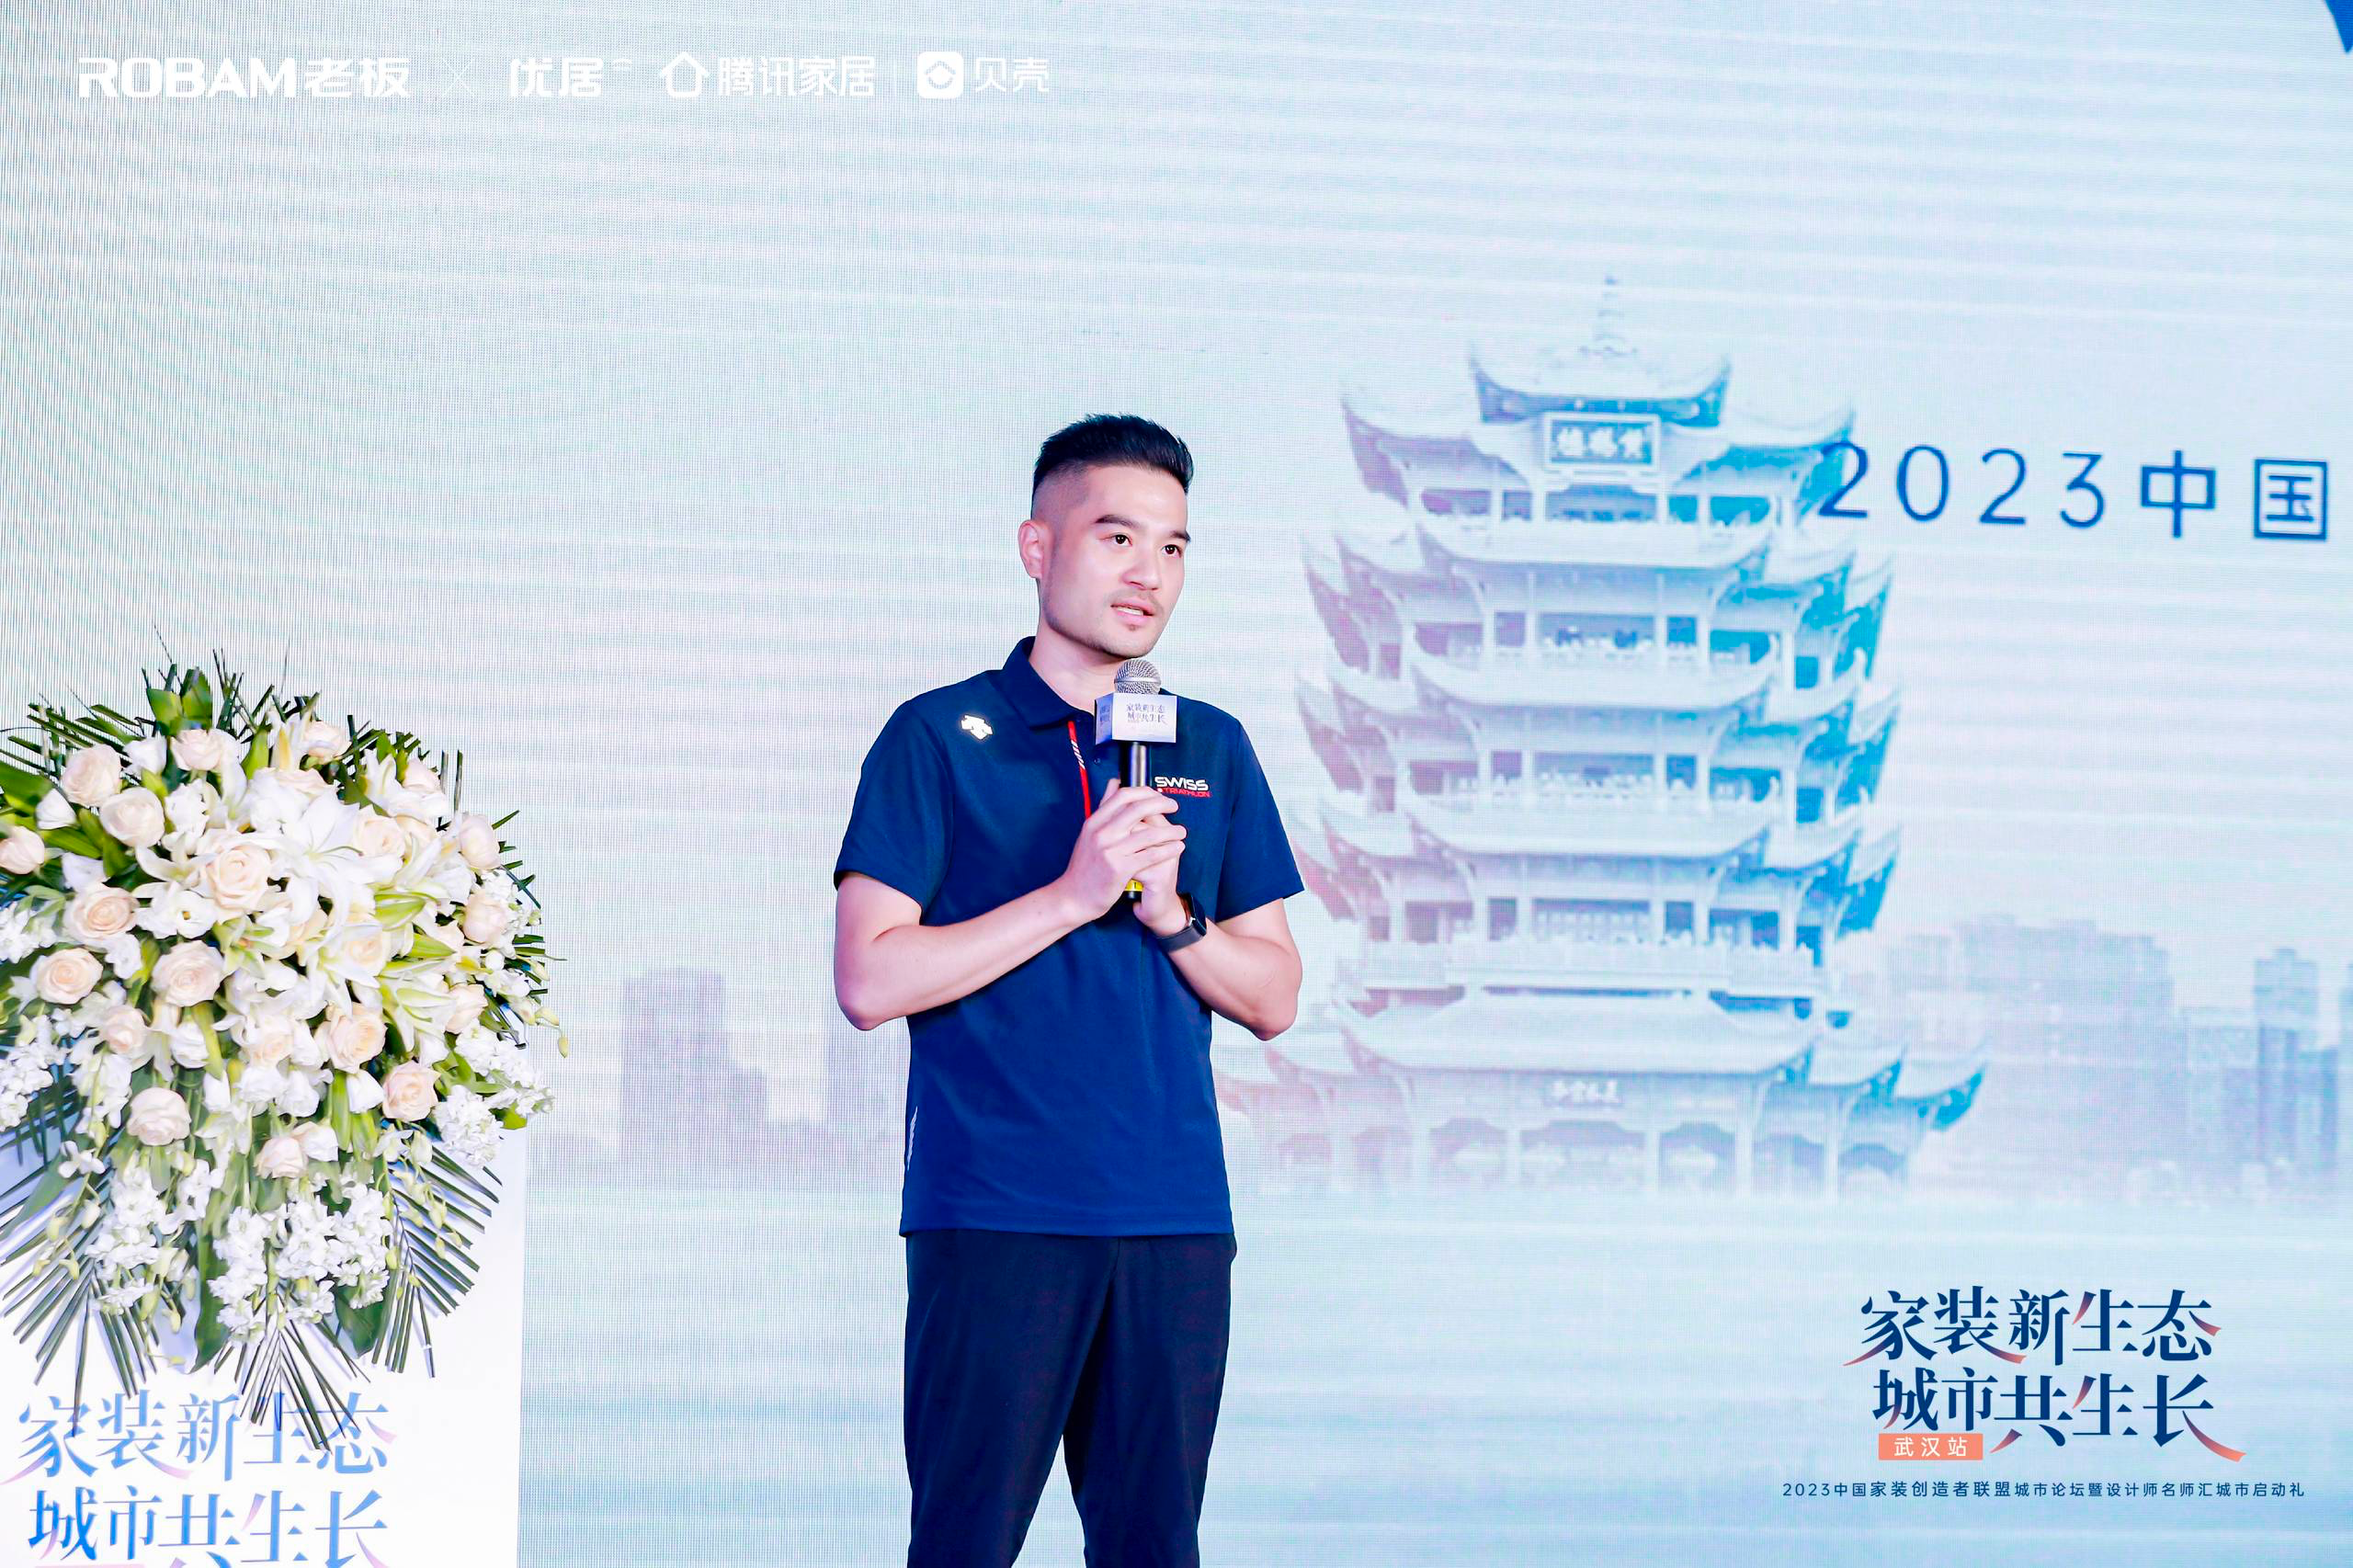  Boss Electrical Appliances Liu Chao | Convergence Gather the Momentum and Work Together to Create a New Blue Ocean for Home Furnishing